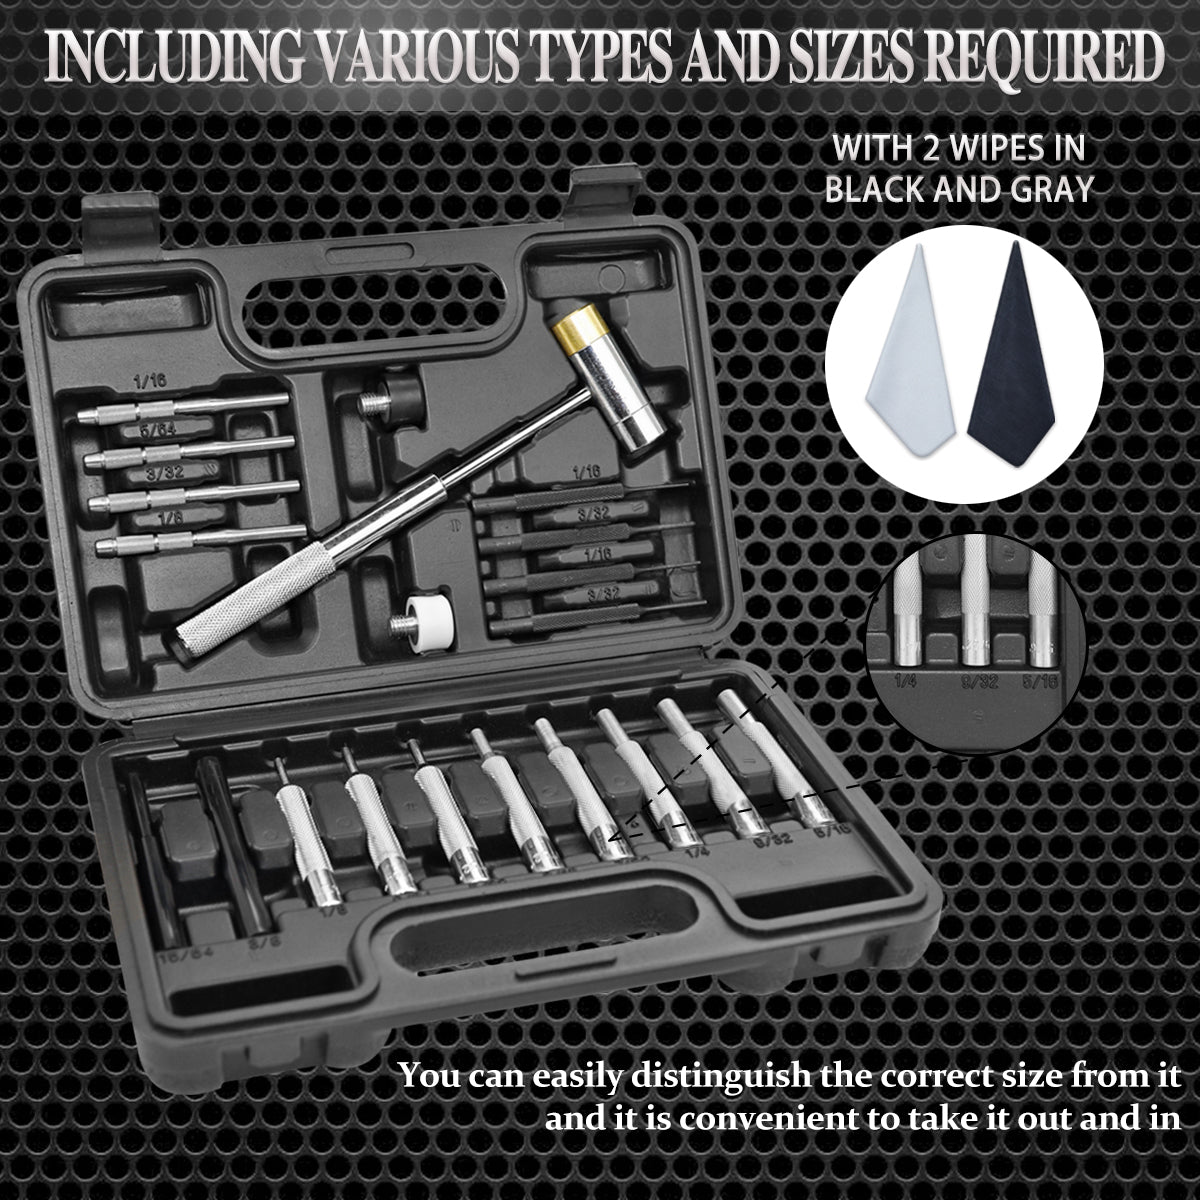 BESTNULE Gunsnithing Punch Set, Pin Punches, Punch Tool, Roll Pin Punch Set, Made of High Quality Metal Material Including Punches and Hammer, Mechanical Repair Tool, with Organizer Storage Box (without Bench Block)